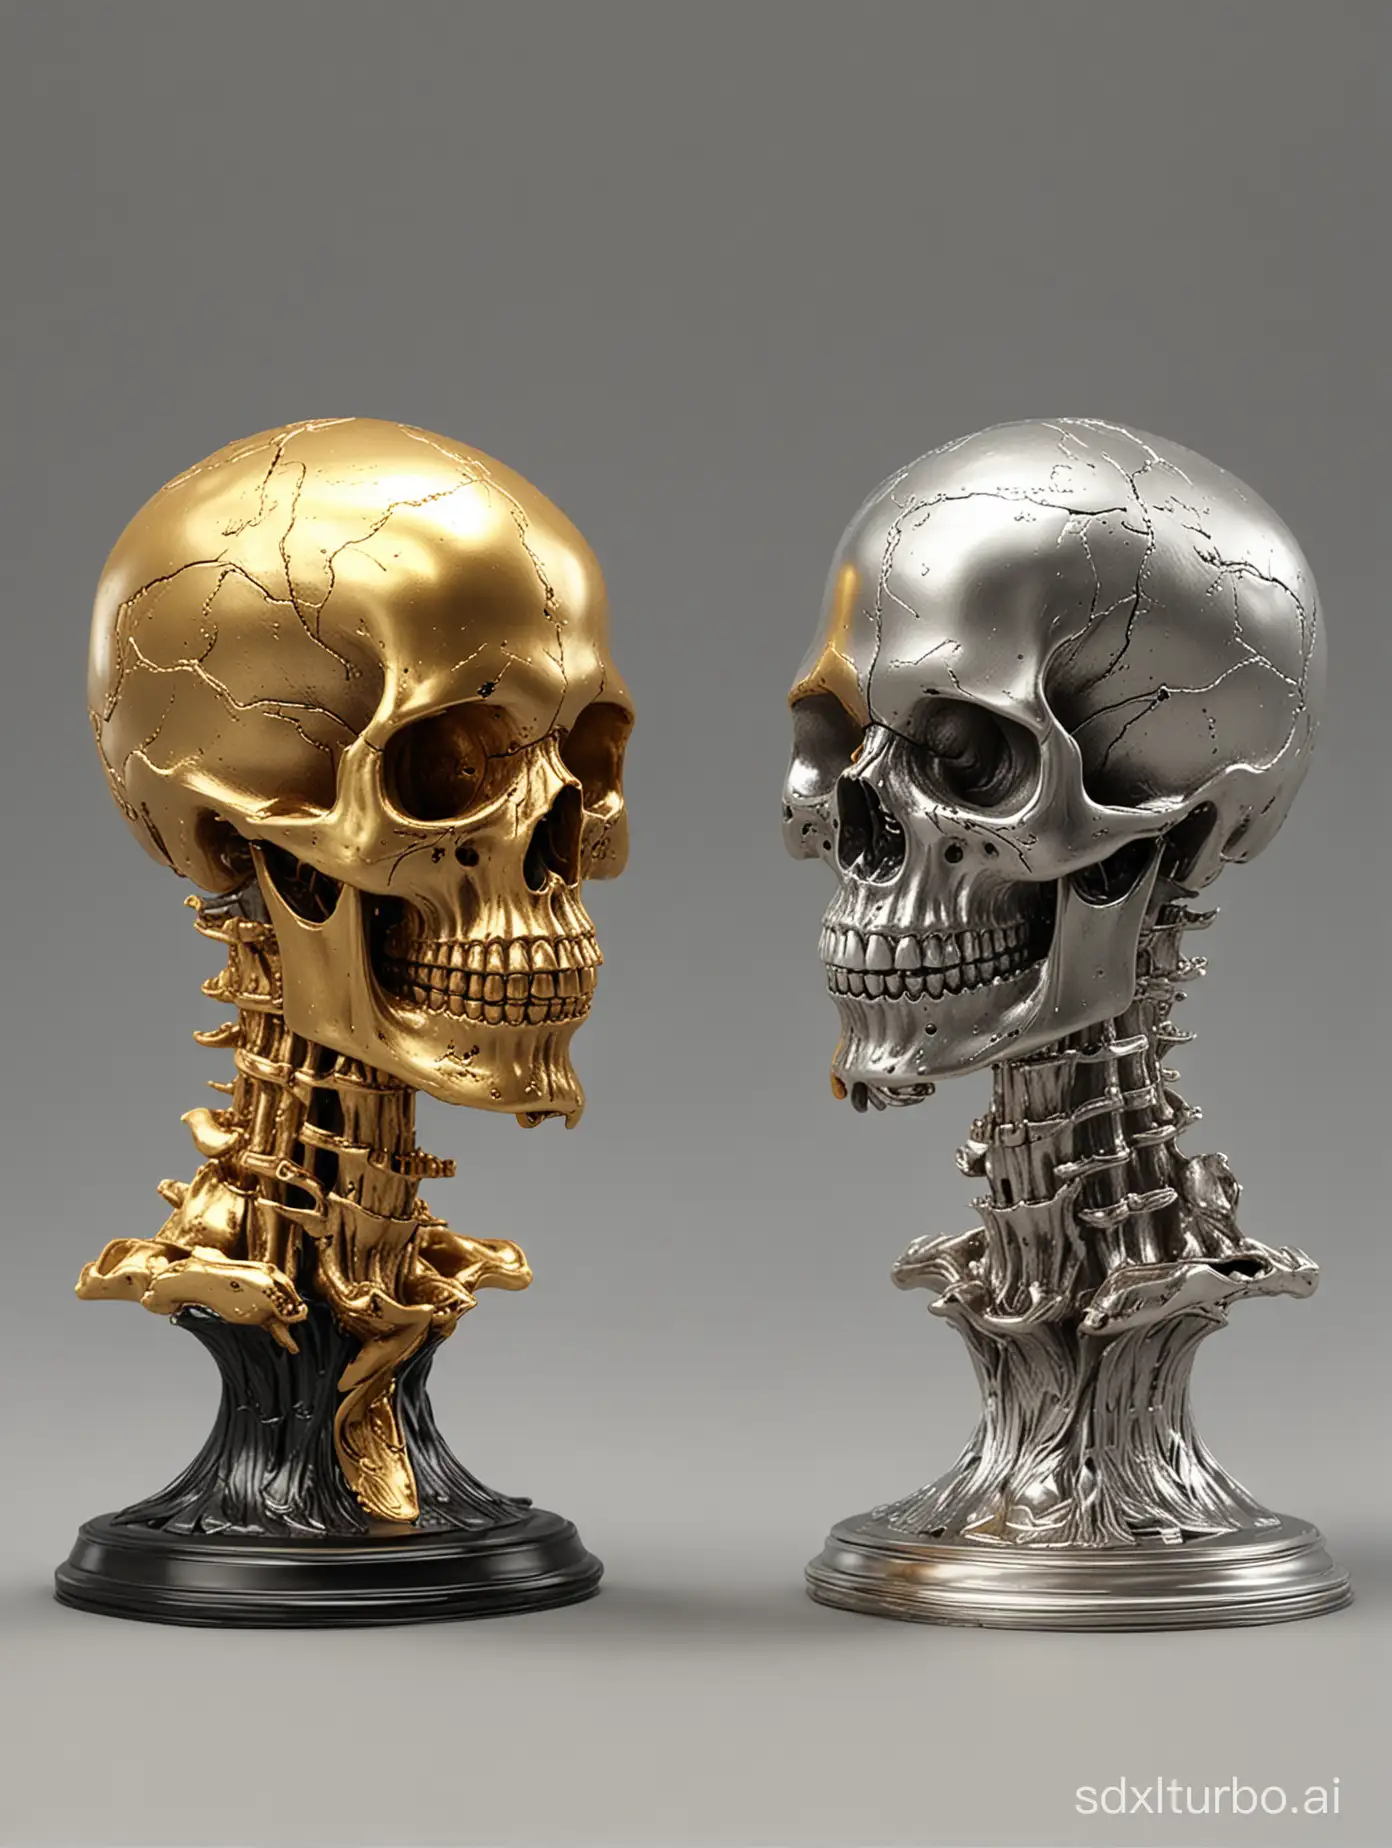 Golden skull and silver skull stand side by side and pose, masterpiece, delicate, realistic